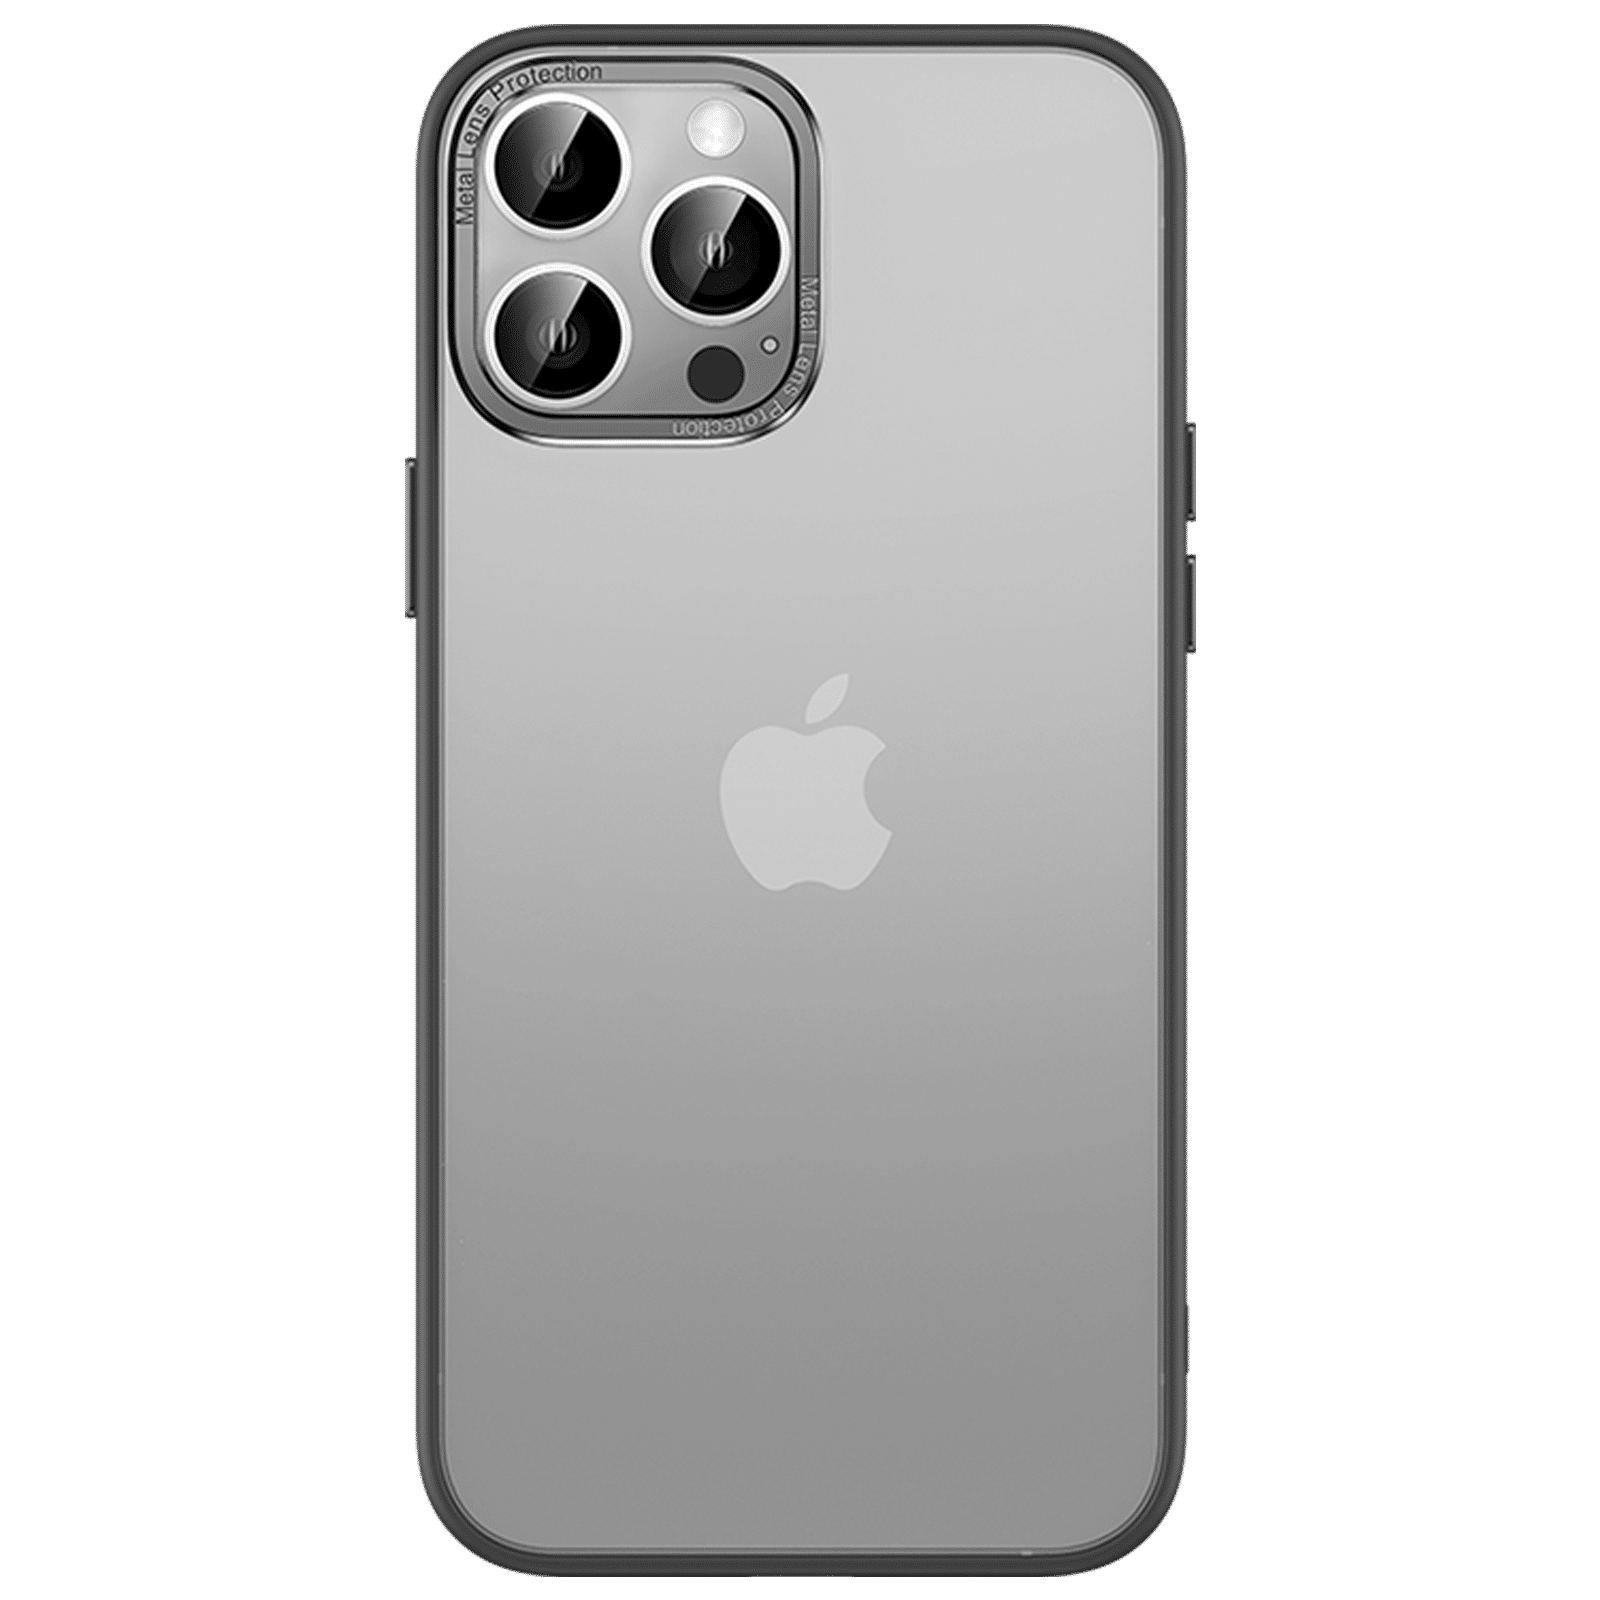 Thermobeans Apple Logo Wallpaper Design Printed Back Cover for Iphone 11